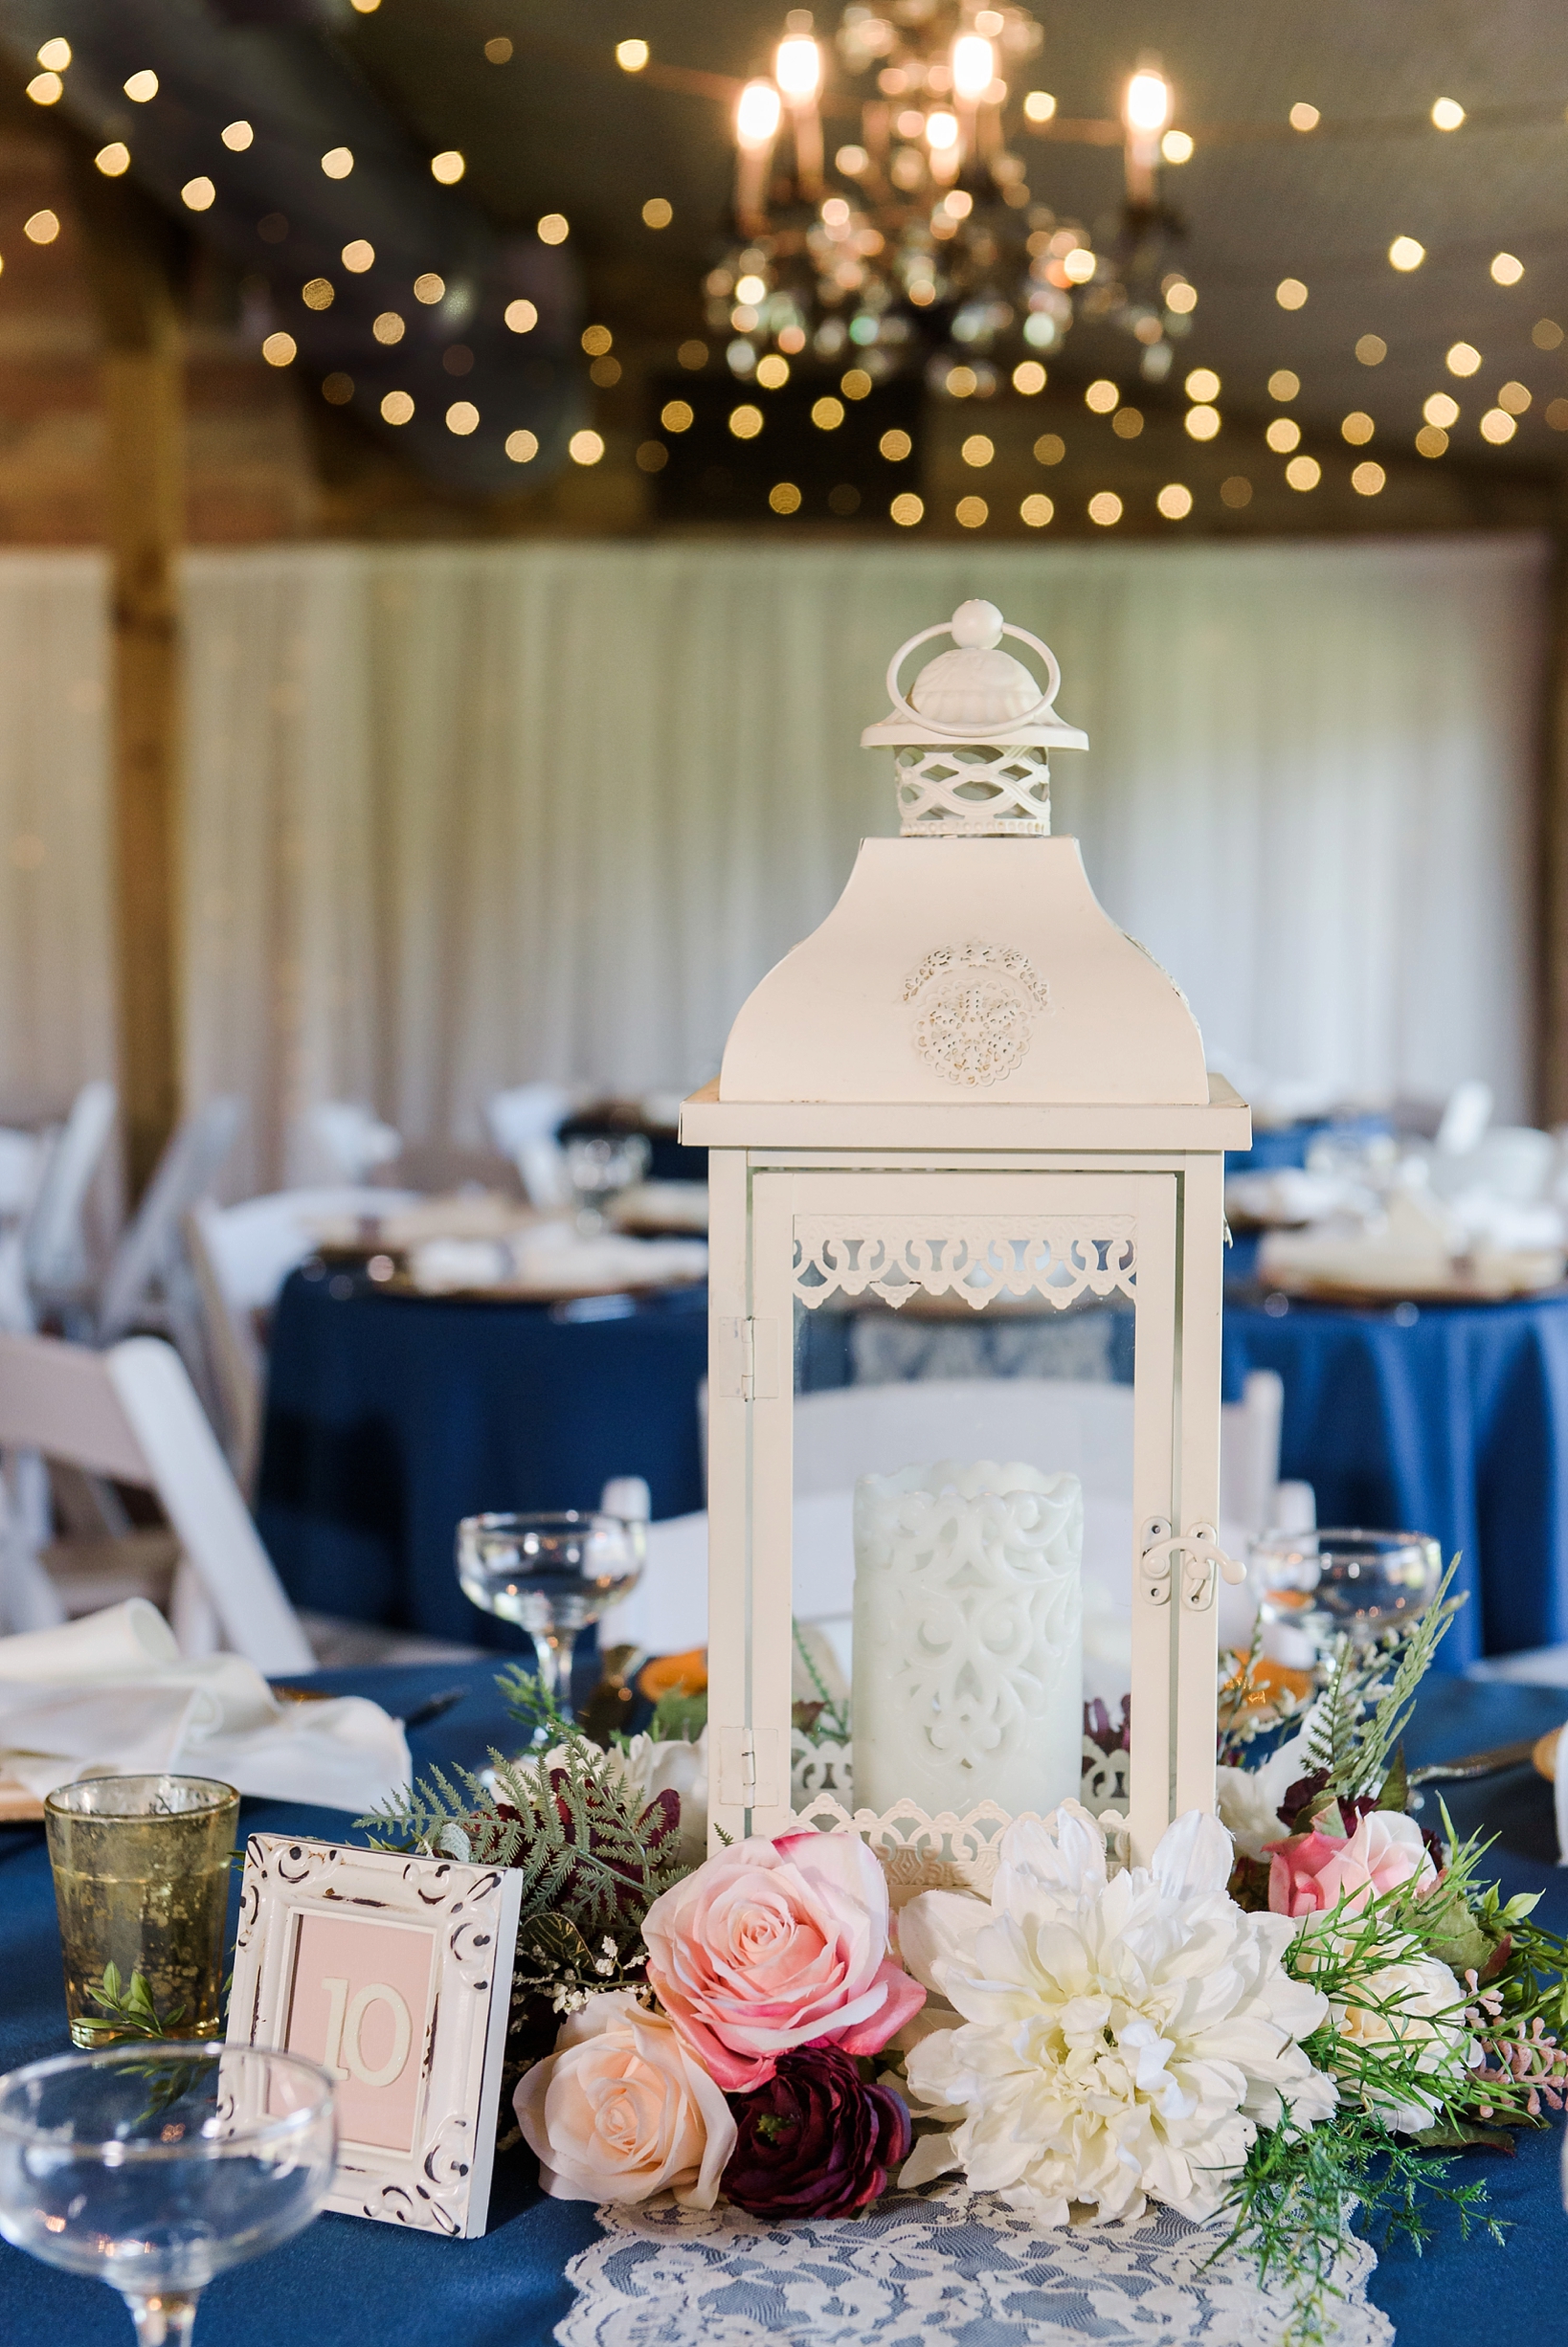 A candleholder centerpiece with floral accents on a navy tablecloth